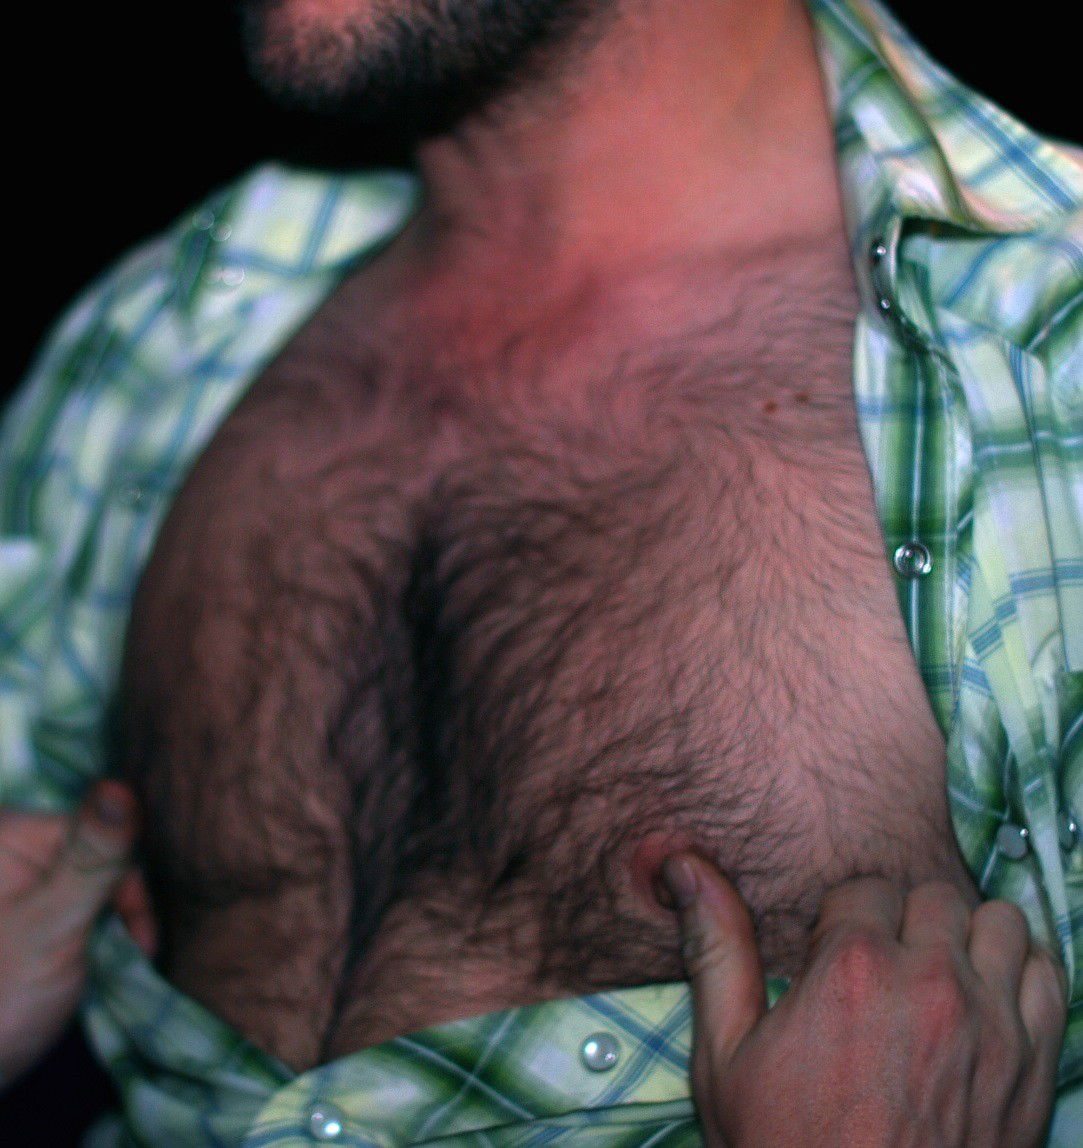 Photo by Smitty with the username @Resol702,  October 14, 2020 at 2:35 PM. The post is about the topic Hairy Man Nips.